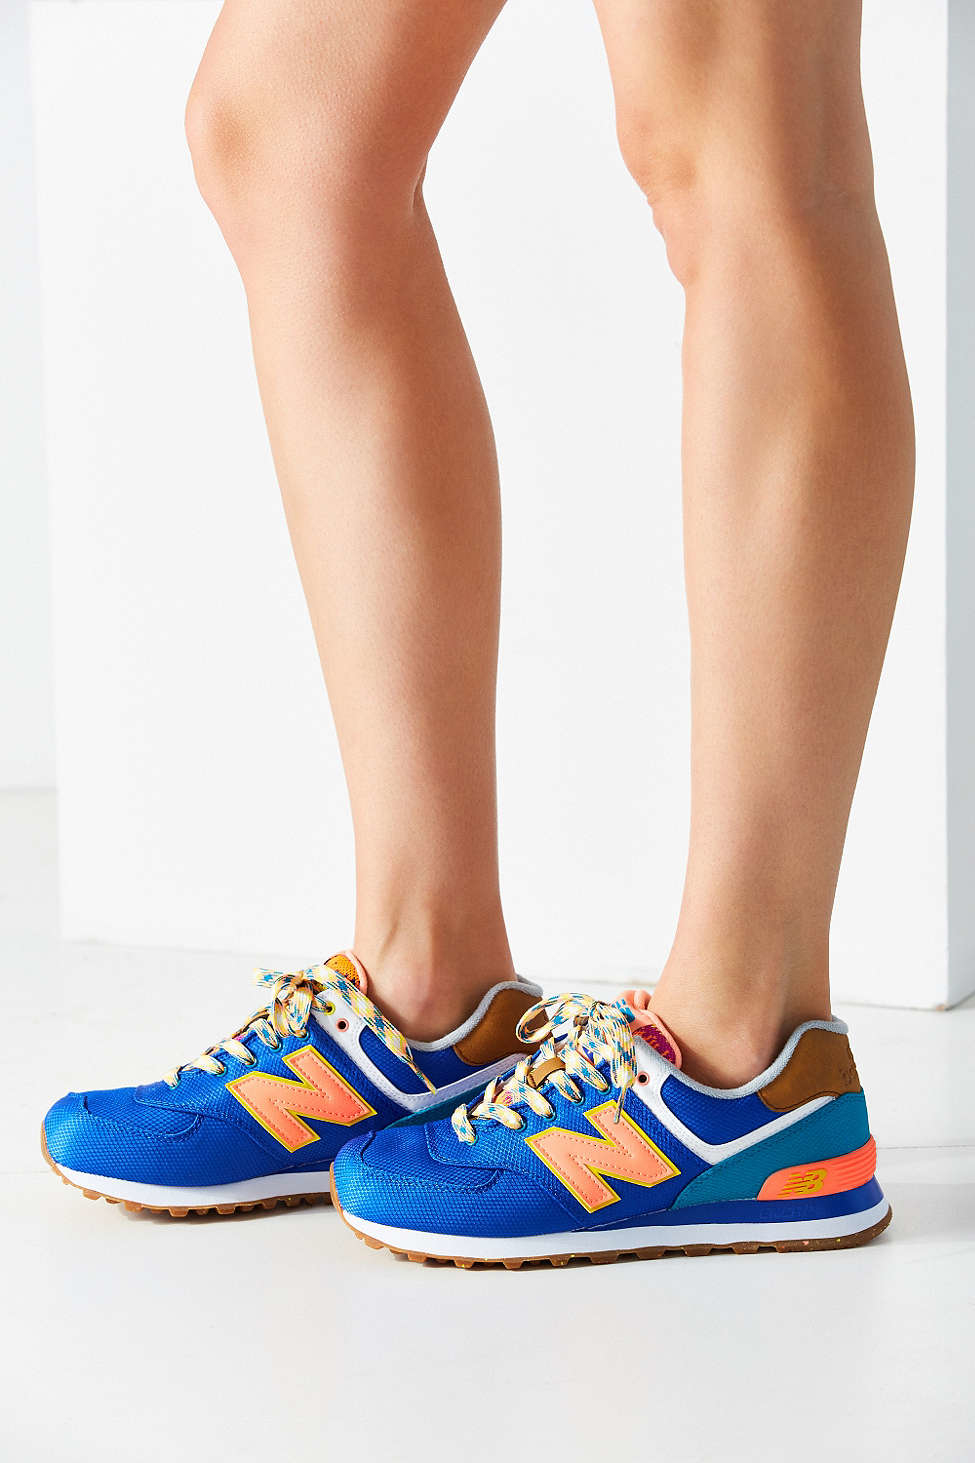 New Balance 574 Weekend Expedition Running Sneaker in Blue - Lyst